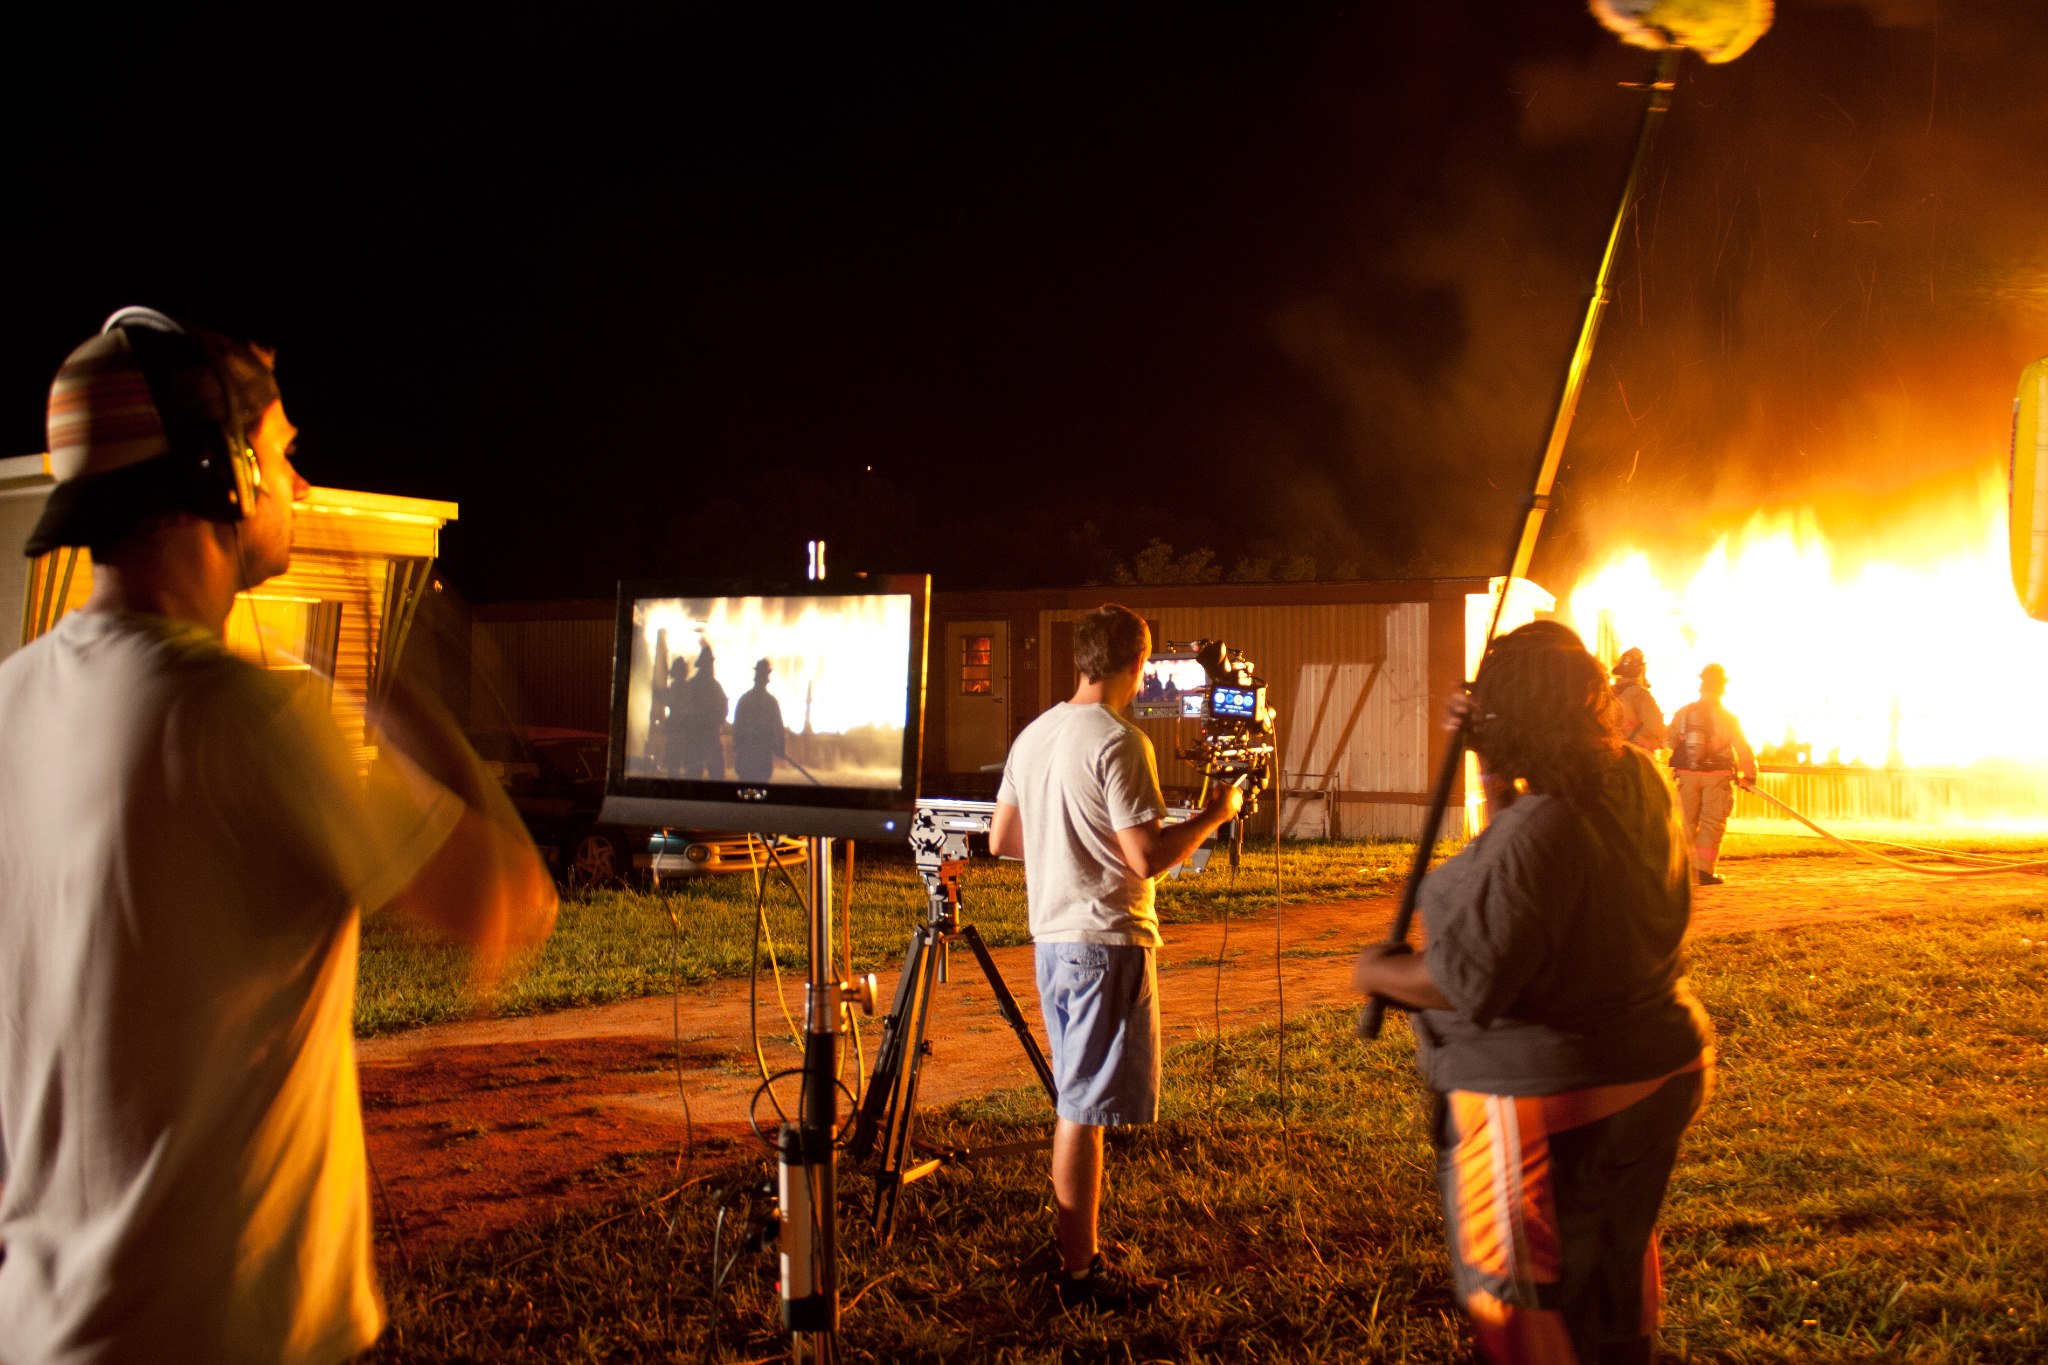 On the set of Redemption of the Commons. Burning down a trailer home.